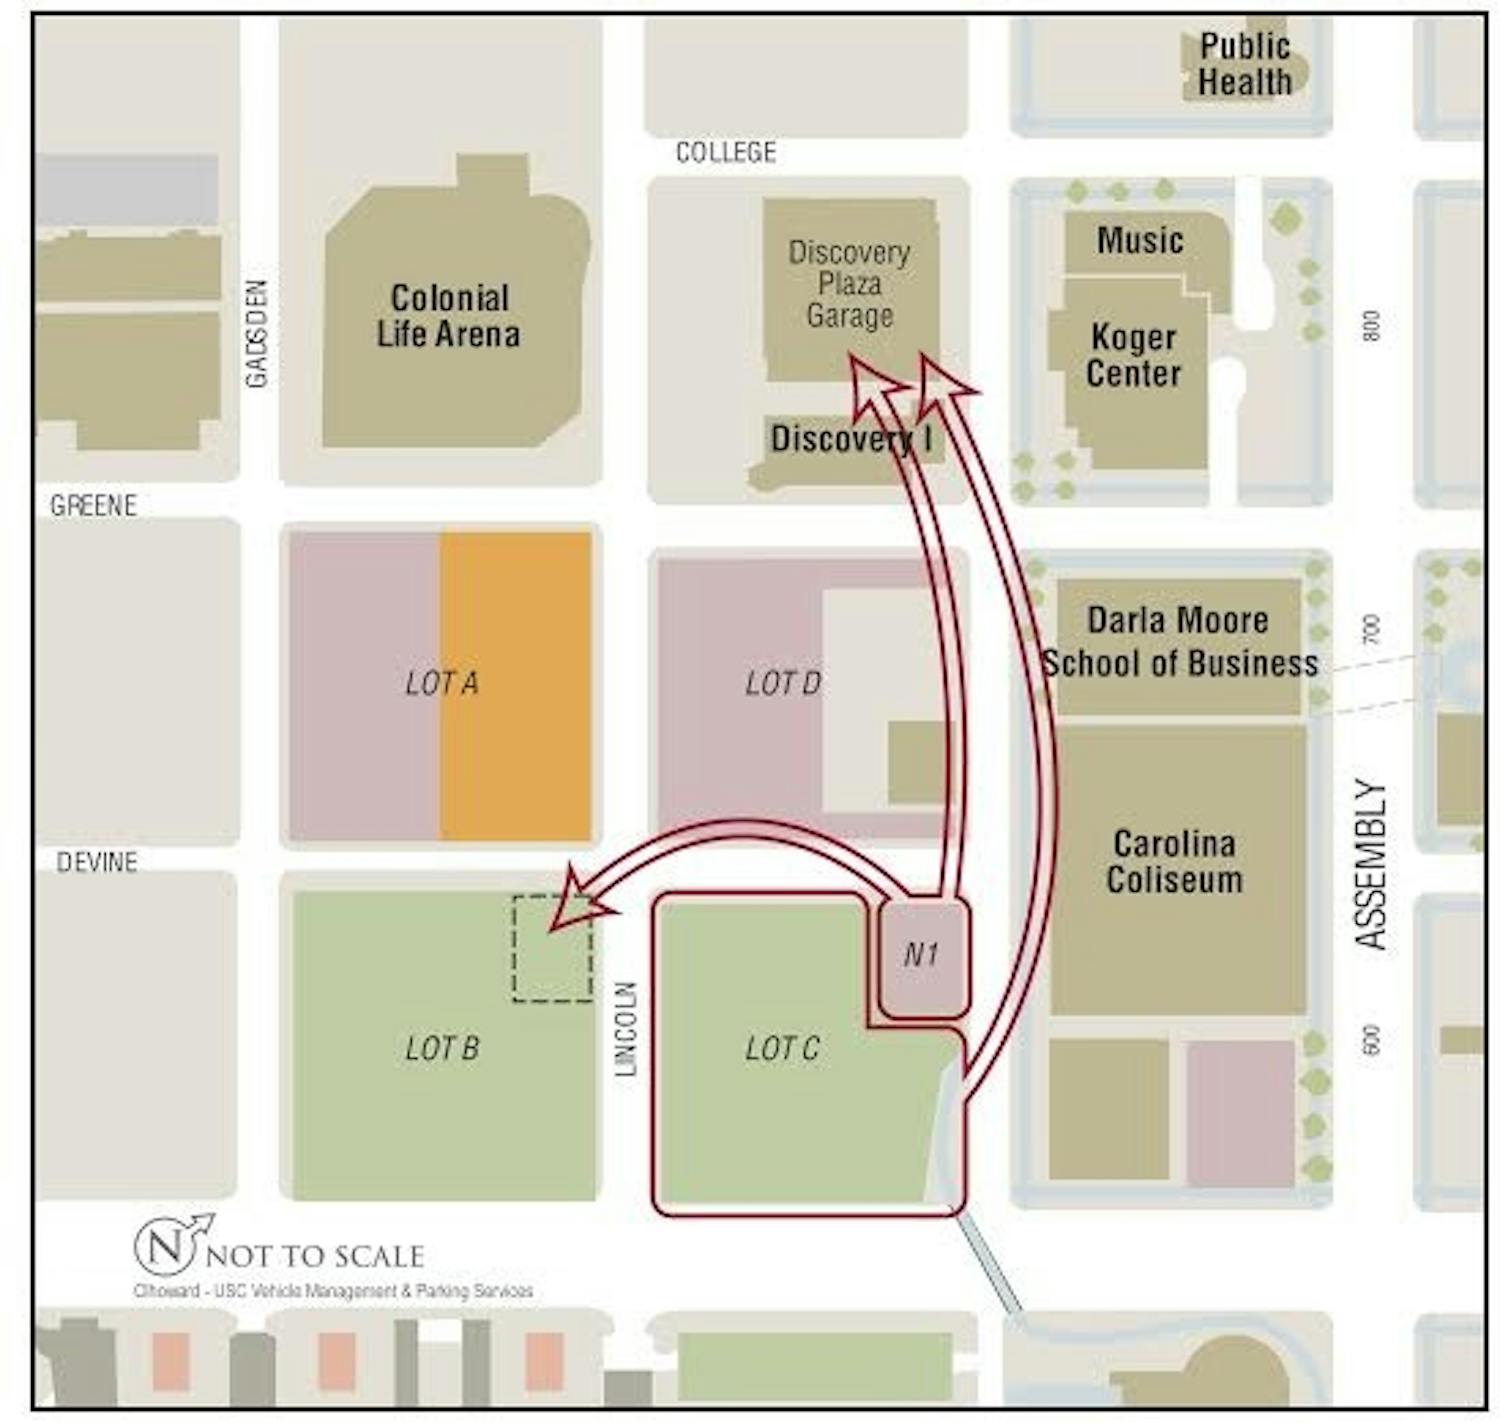 	Earlier this month, USC permanently closed a parking lot by the Carolina Coliseum (lot C), and another (lot D) will close later this year. The closures add to a decrease of 2,100 parking spots over the last three years.